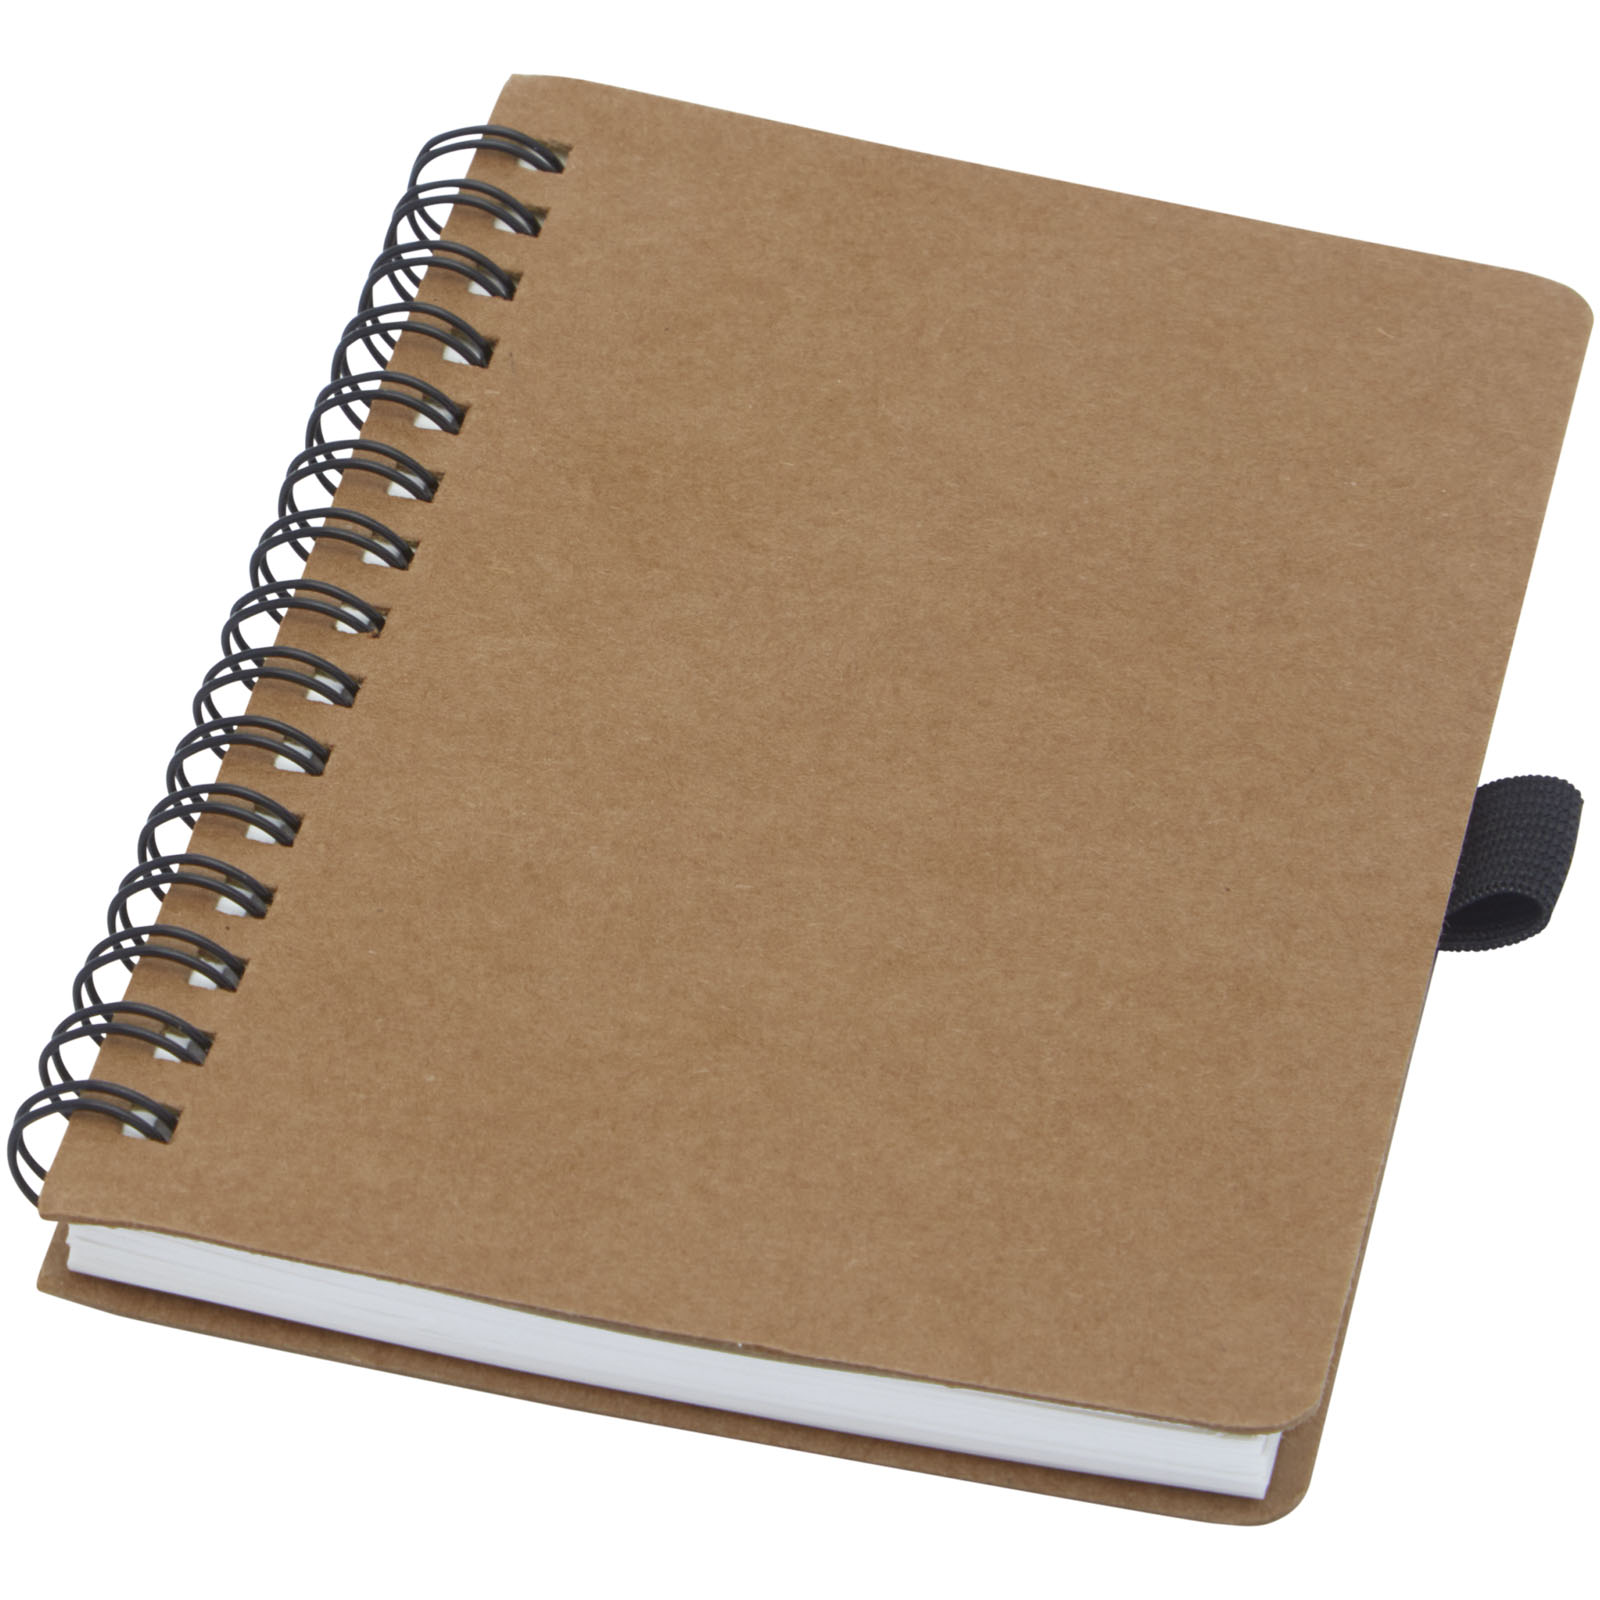 Advertising Notebooks - Cobble A6 wire-o recycled cardboard notebook with stone paper